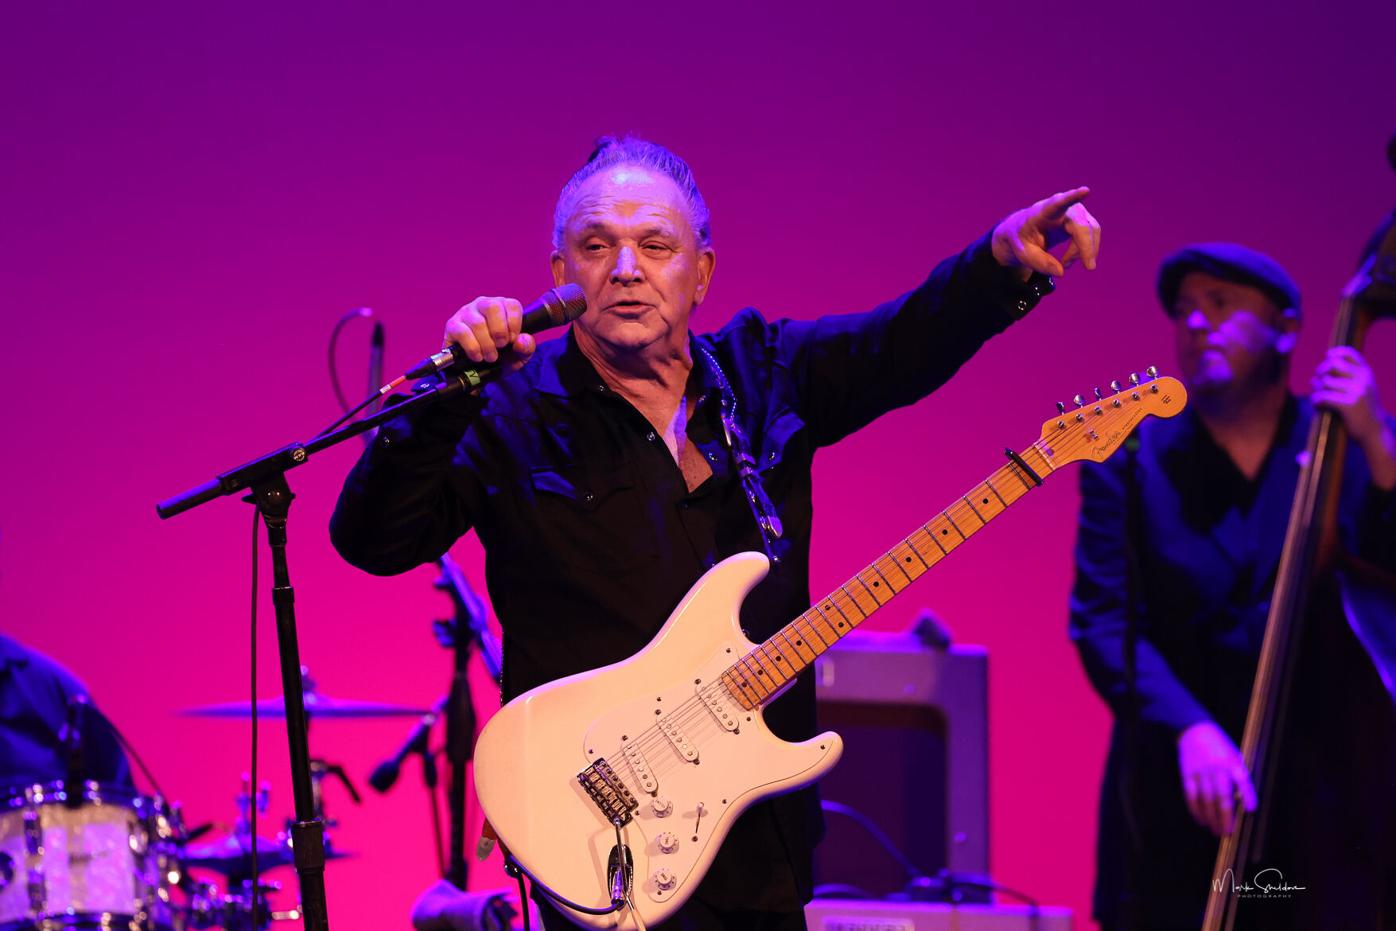 Jimmie Vaughan and the Tilt-A-Whirl Band